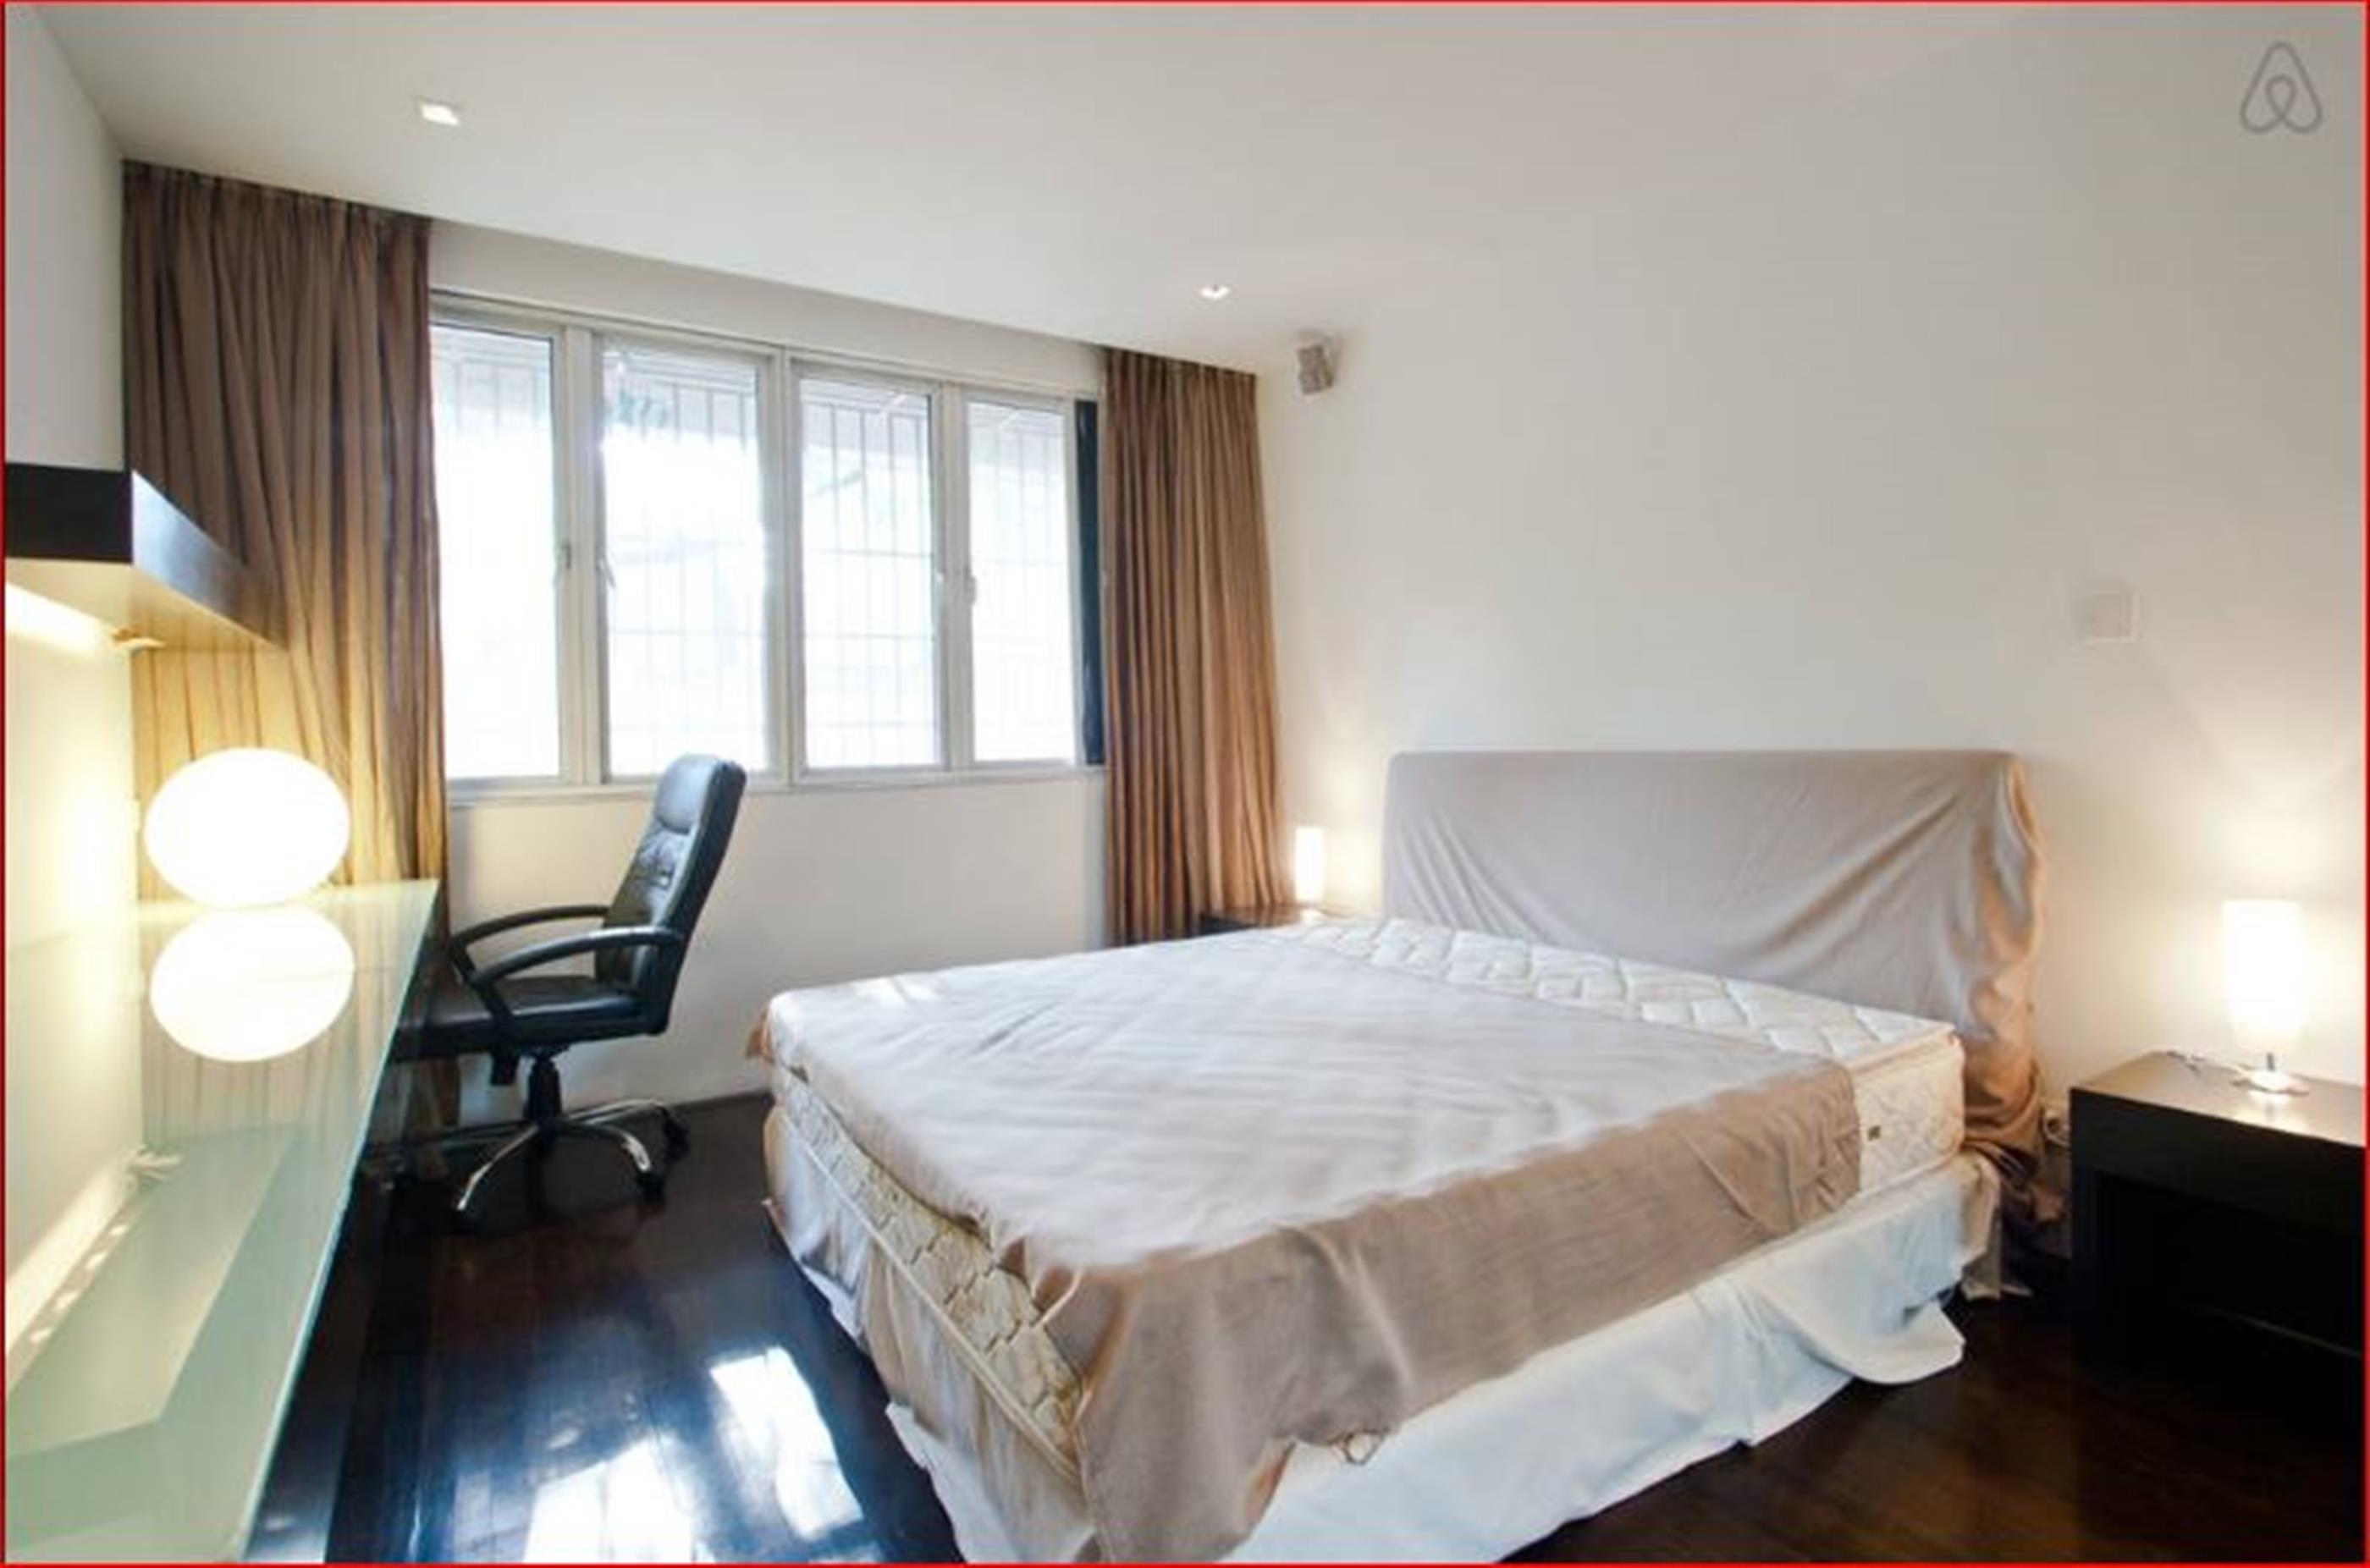 large bathroom Renovated Bright Spacious Modern FFC 1BR Apt nr LN1/2/7/10/11 in Shanghai for Rent